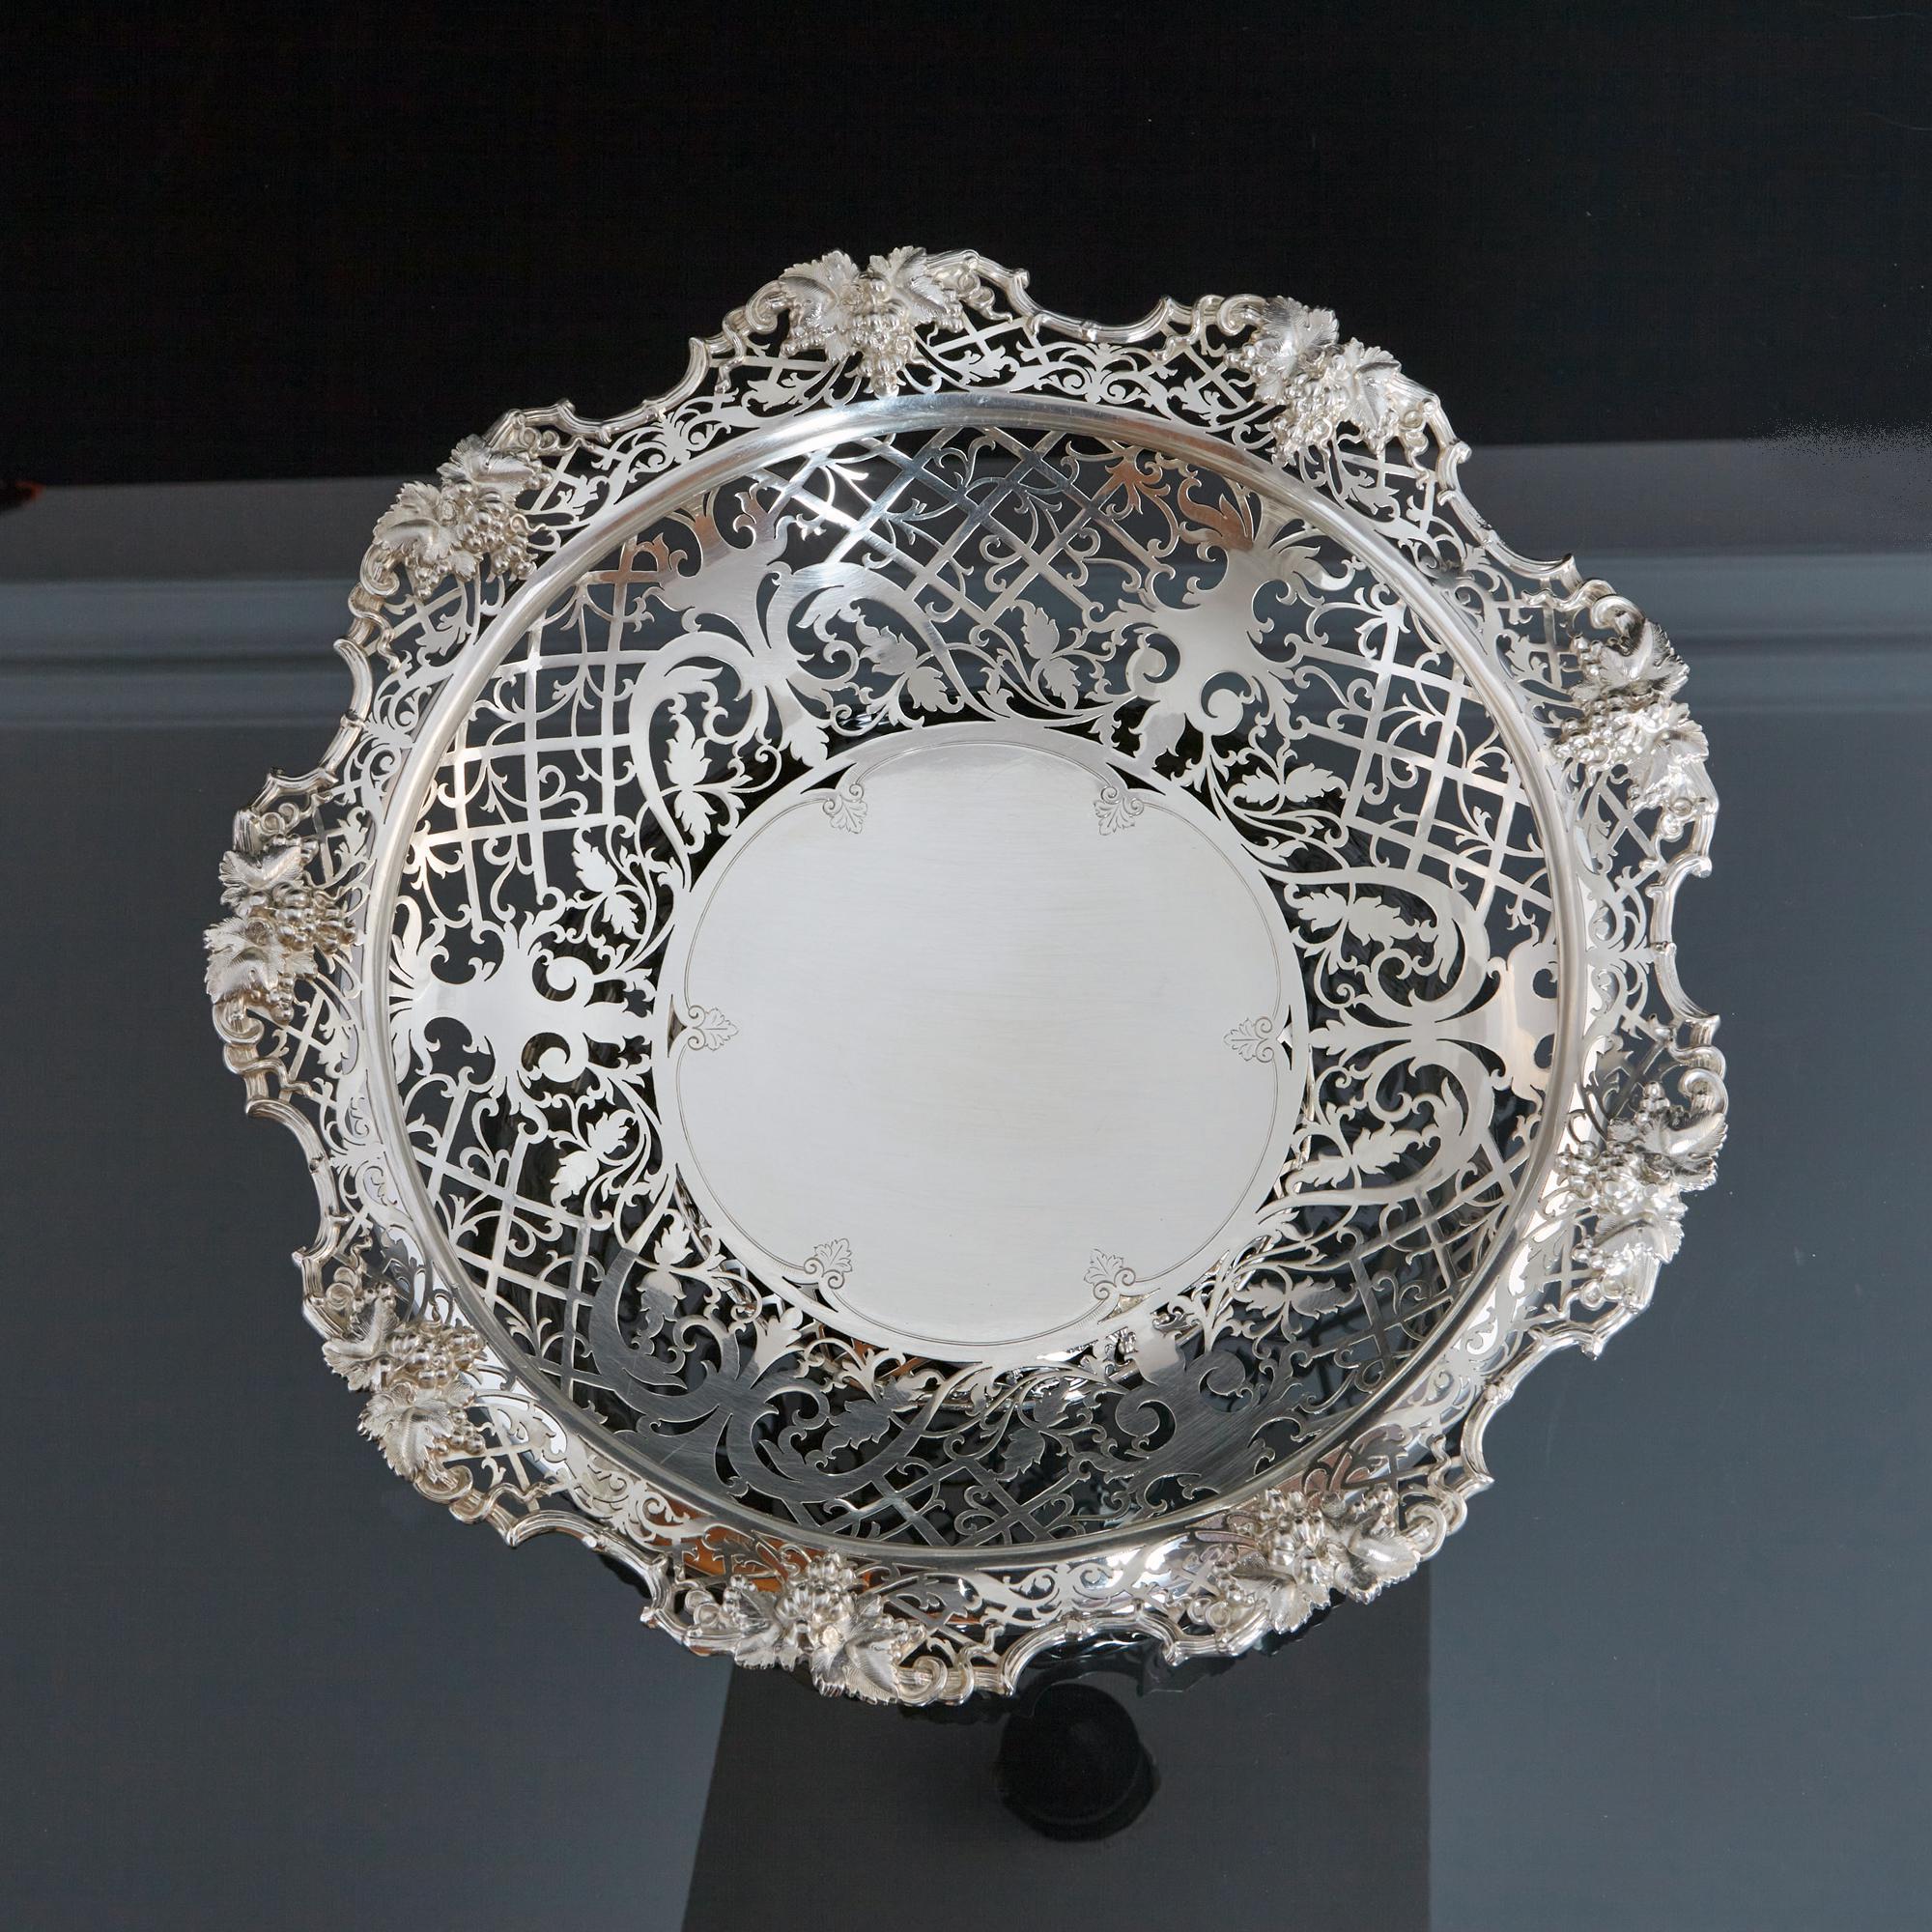 A most impressive antique, pierced silver fruit bowl entirely hand constructed and the largest example of this style we have seen. The bowl and base have been raised from single circles of silver, the patterns were then drawn on by the artist before